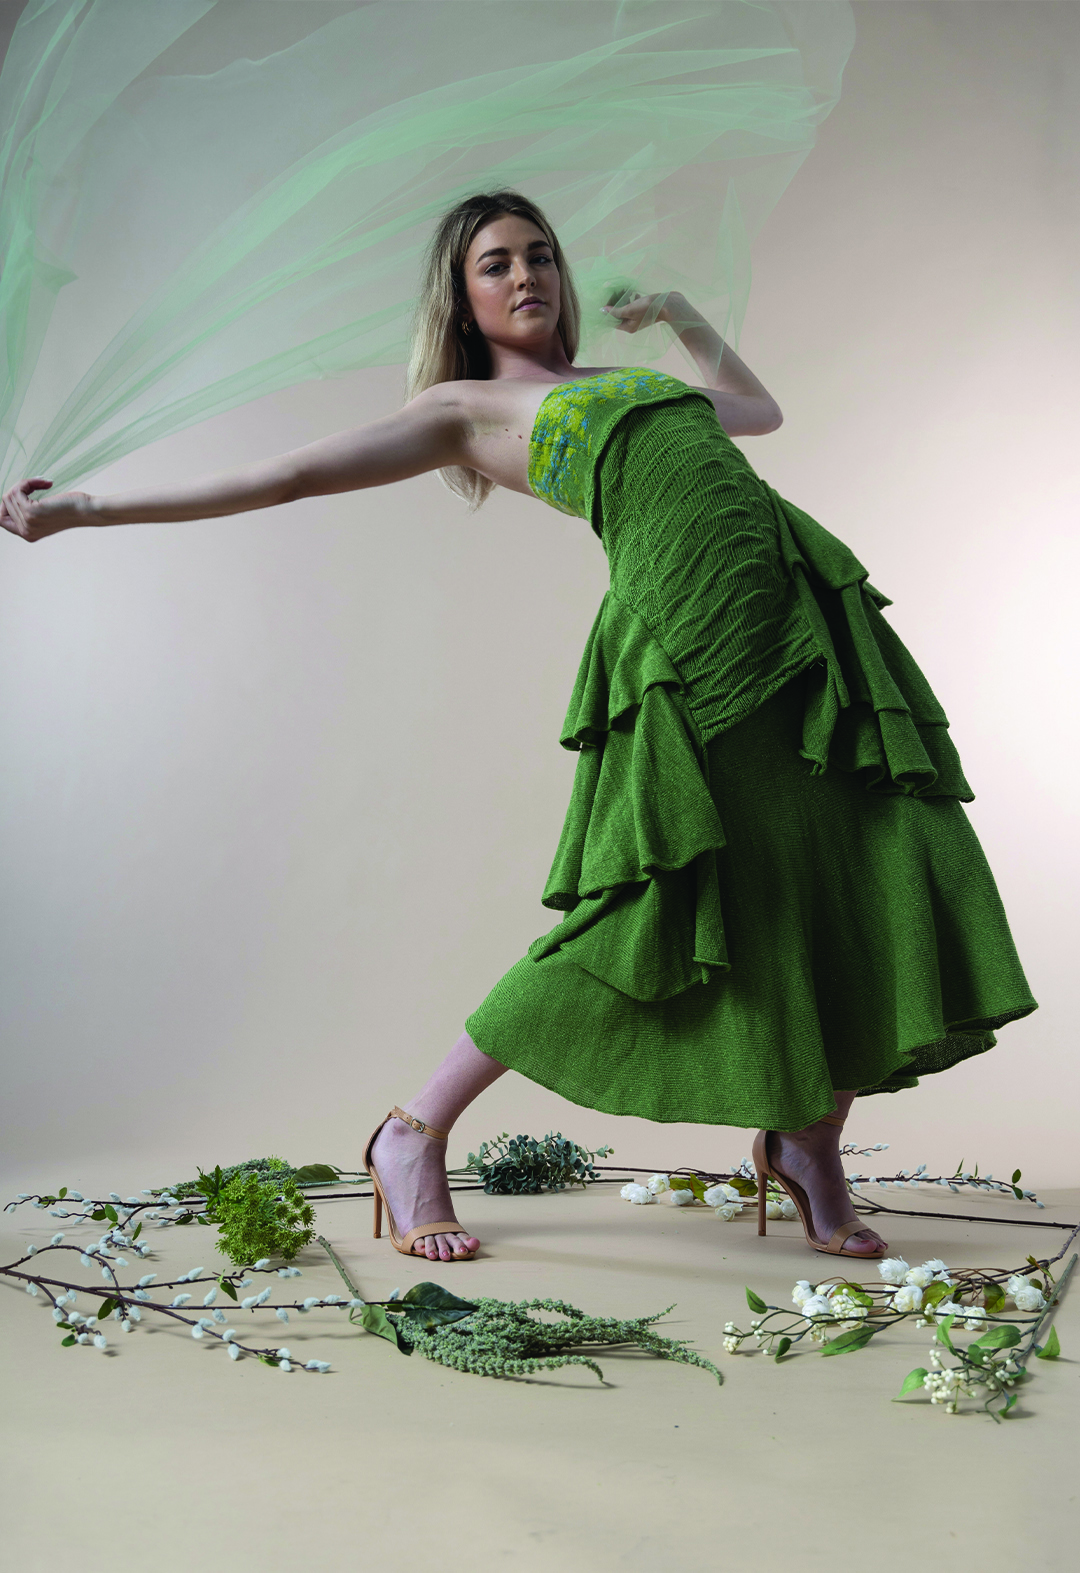 A female model holding a green net veil stretches backward, creating a dramatic movement. 